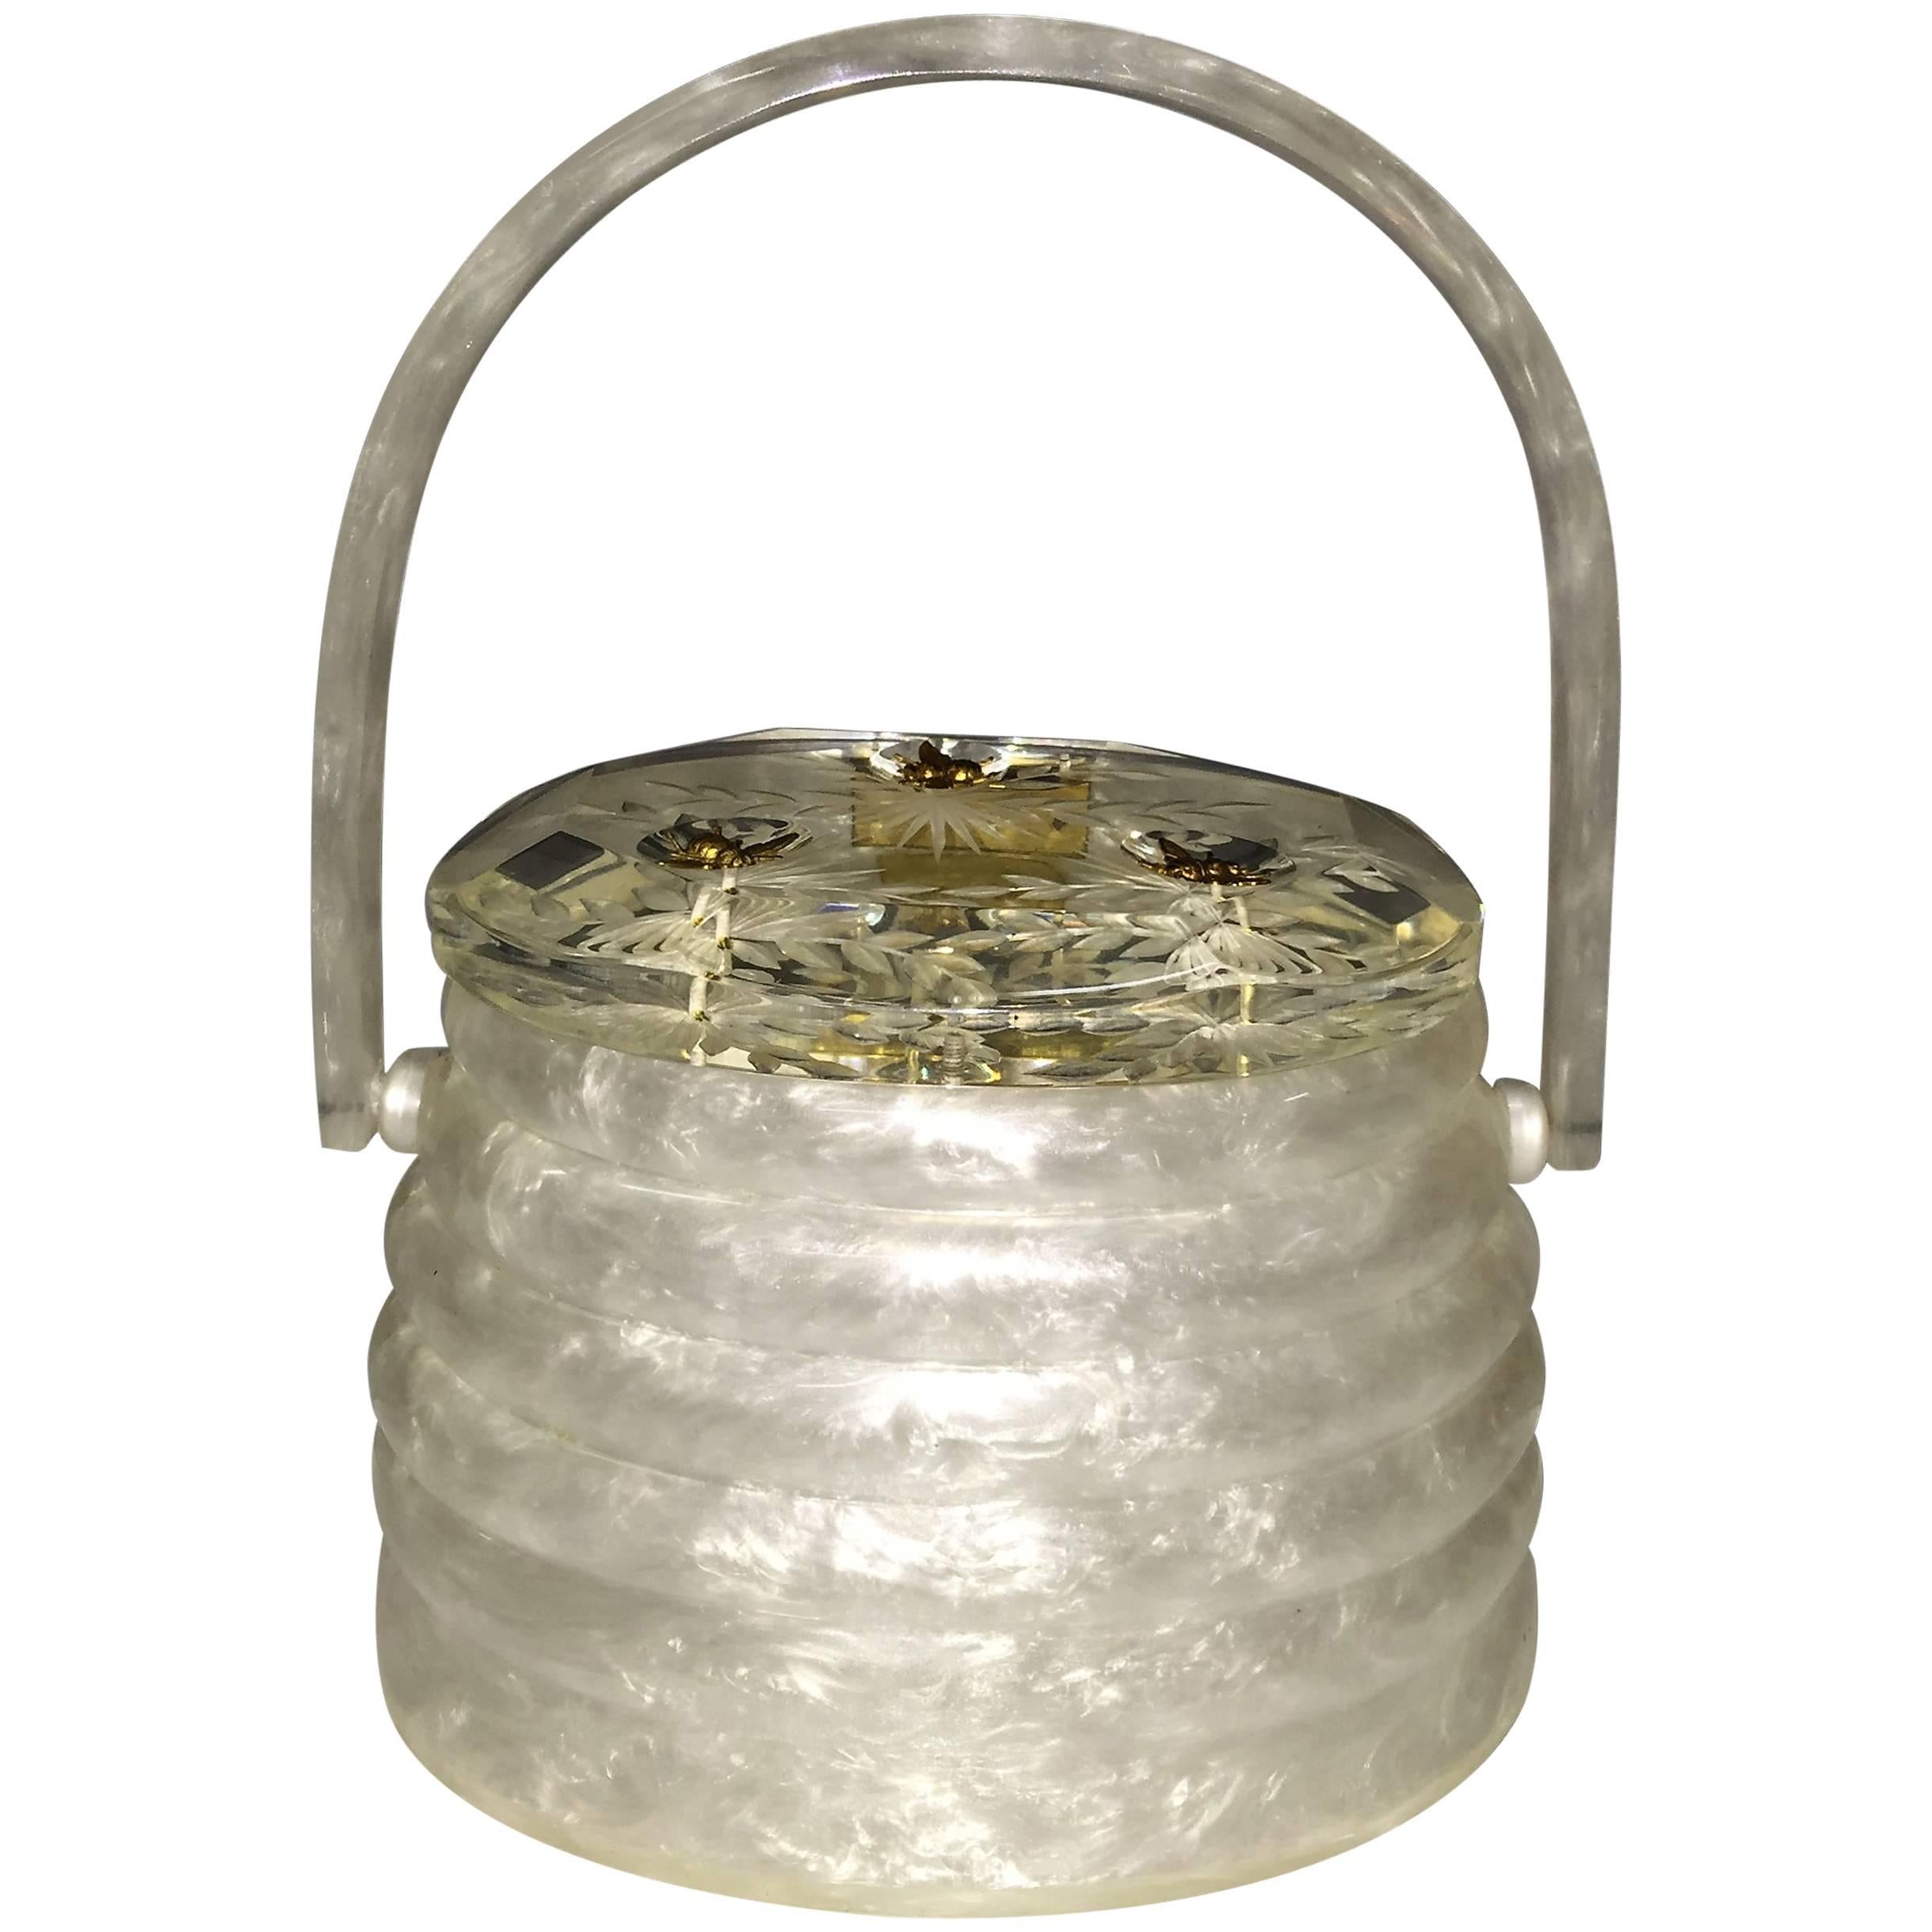 Exceptional White Pearlized Beehive Lucite Handbag with Goldtone Bees